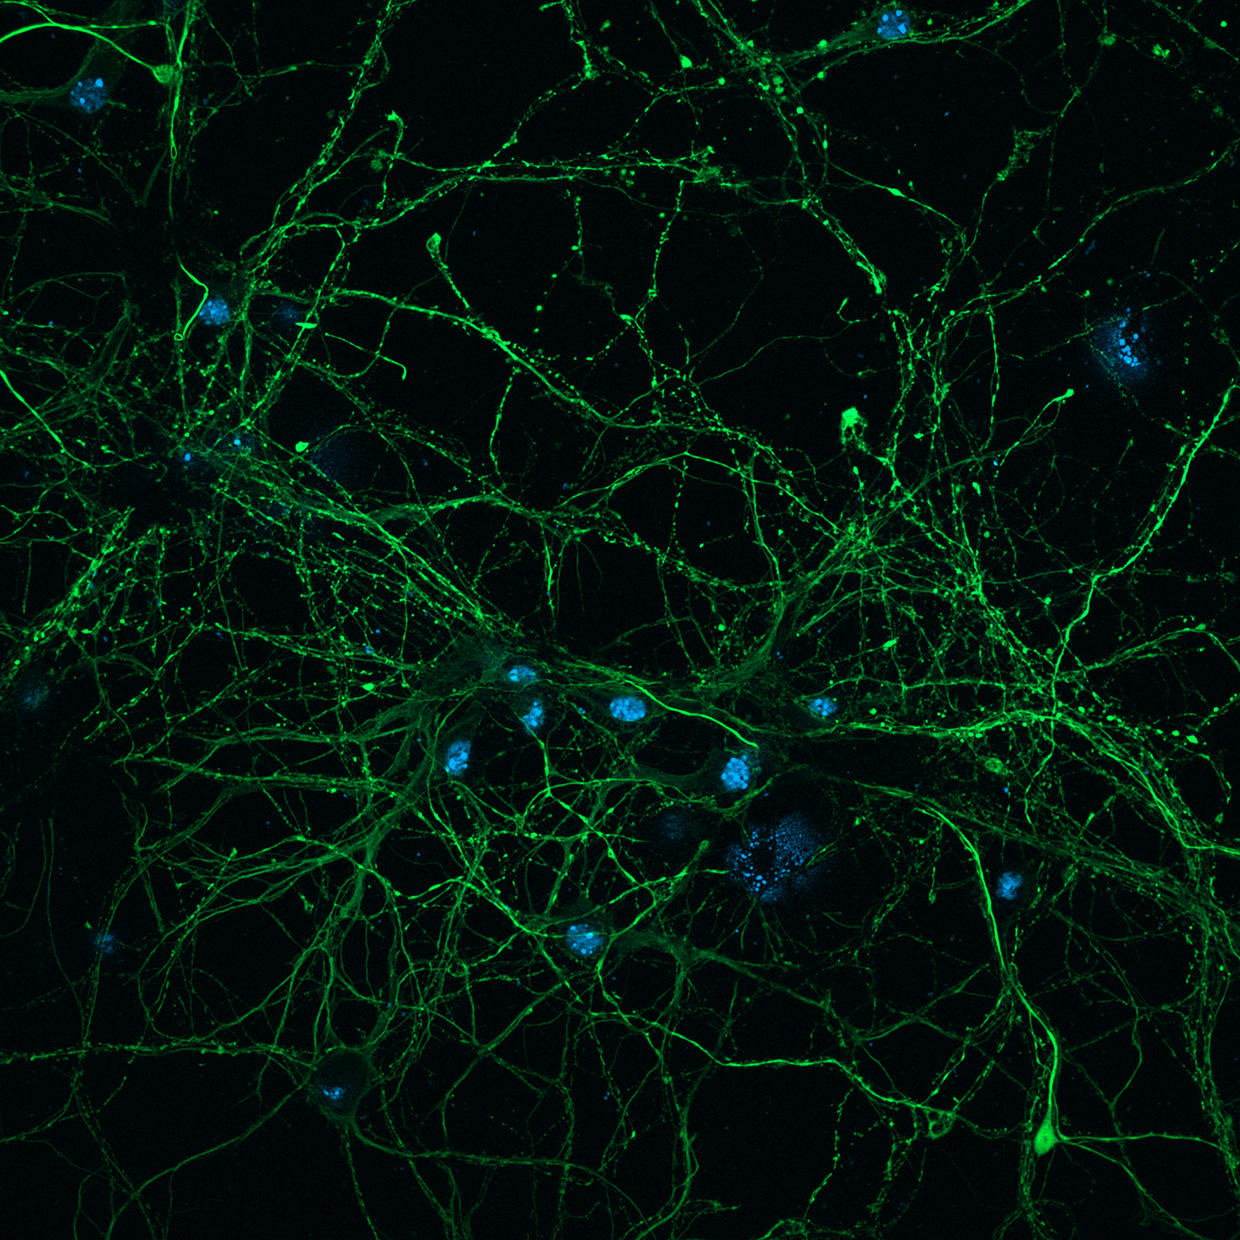 Cortical neurons (left: Widefield; right: Apotome 3). Courtesy of L. Behrendt, Leibniz-Institute on Aging – Fritz-Lipmann-Institut e.V. (FLI), Germany.